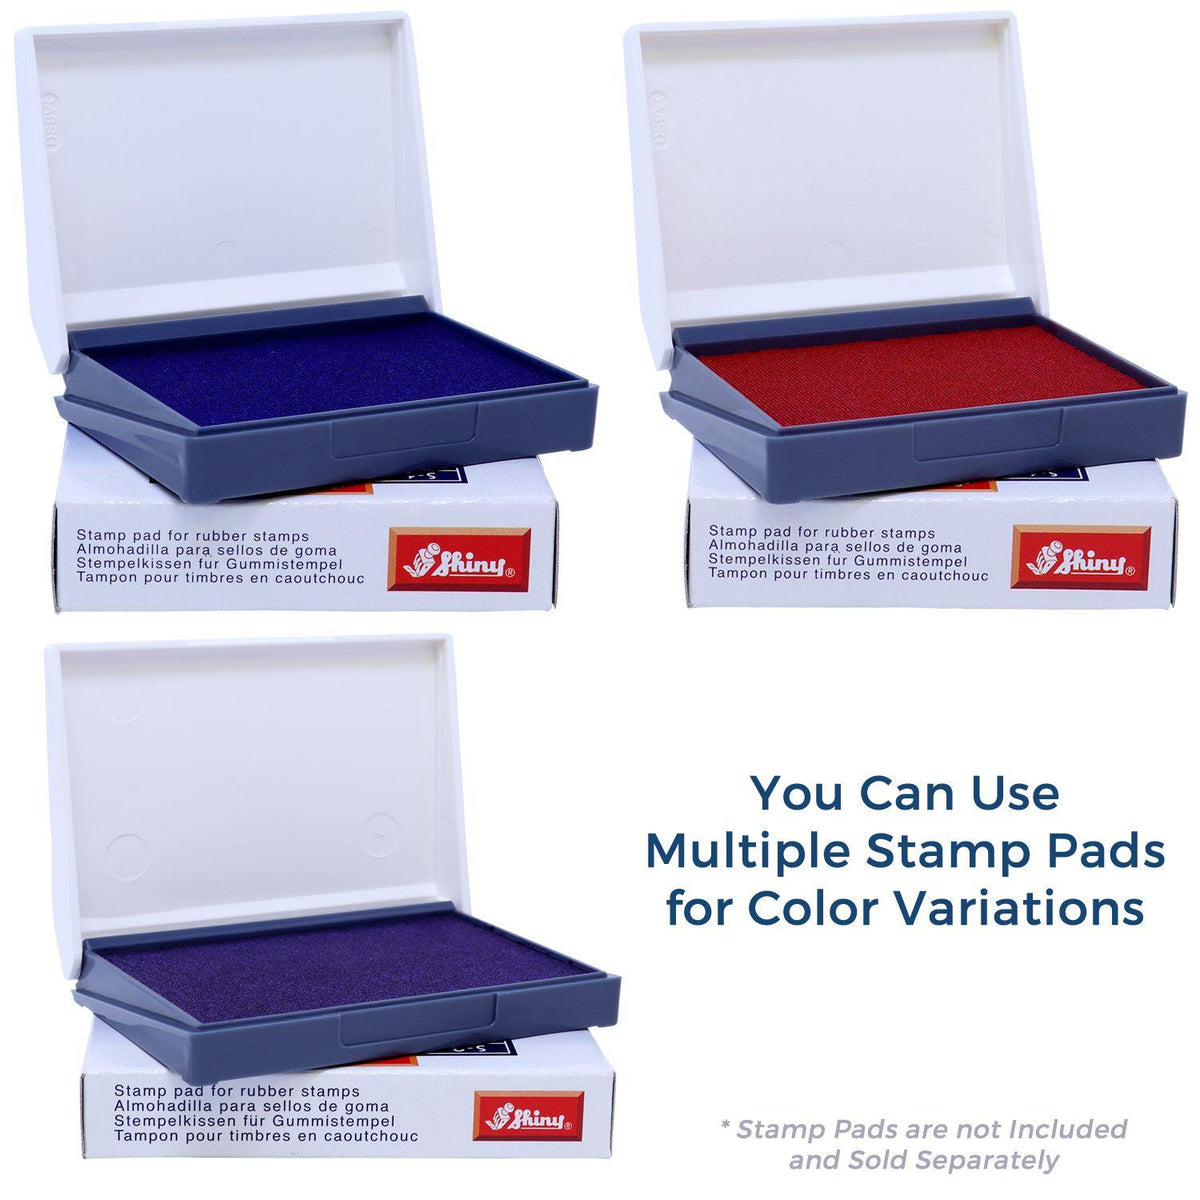 Stamp Pads for Times First Class Mail Rubber Stamp Available